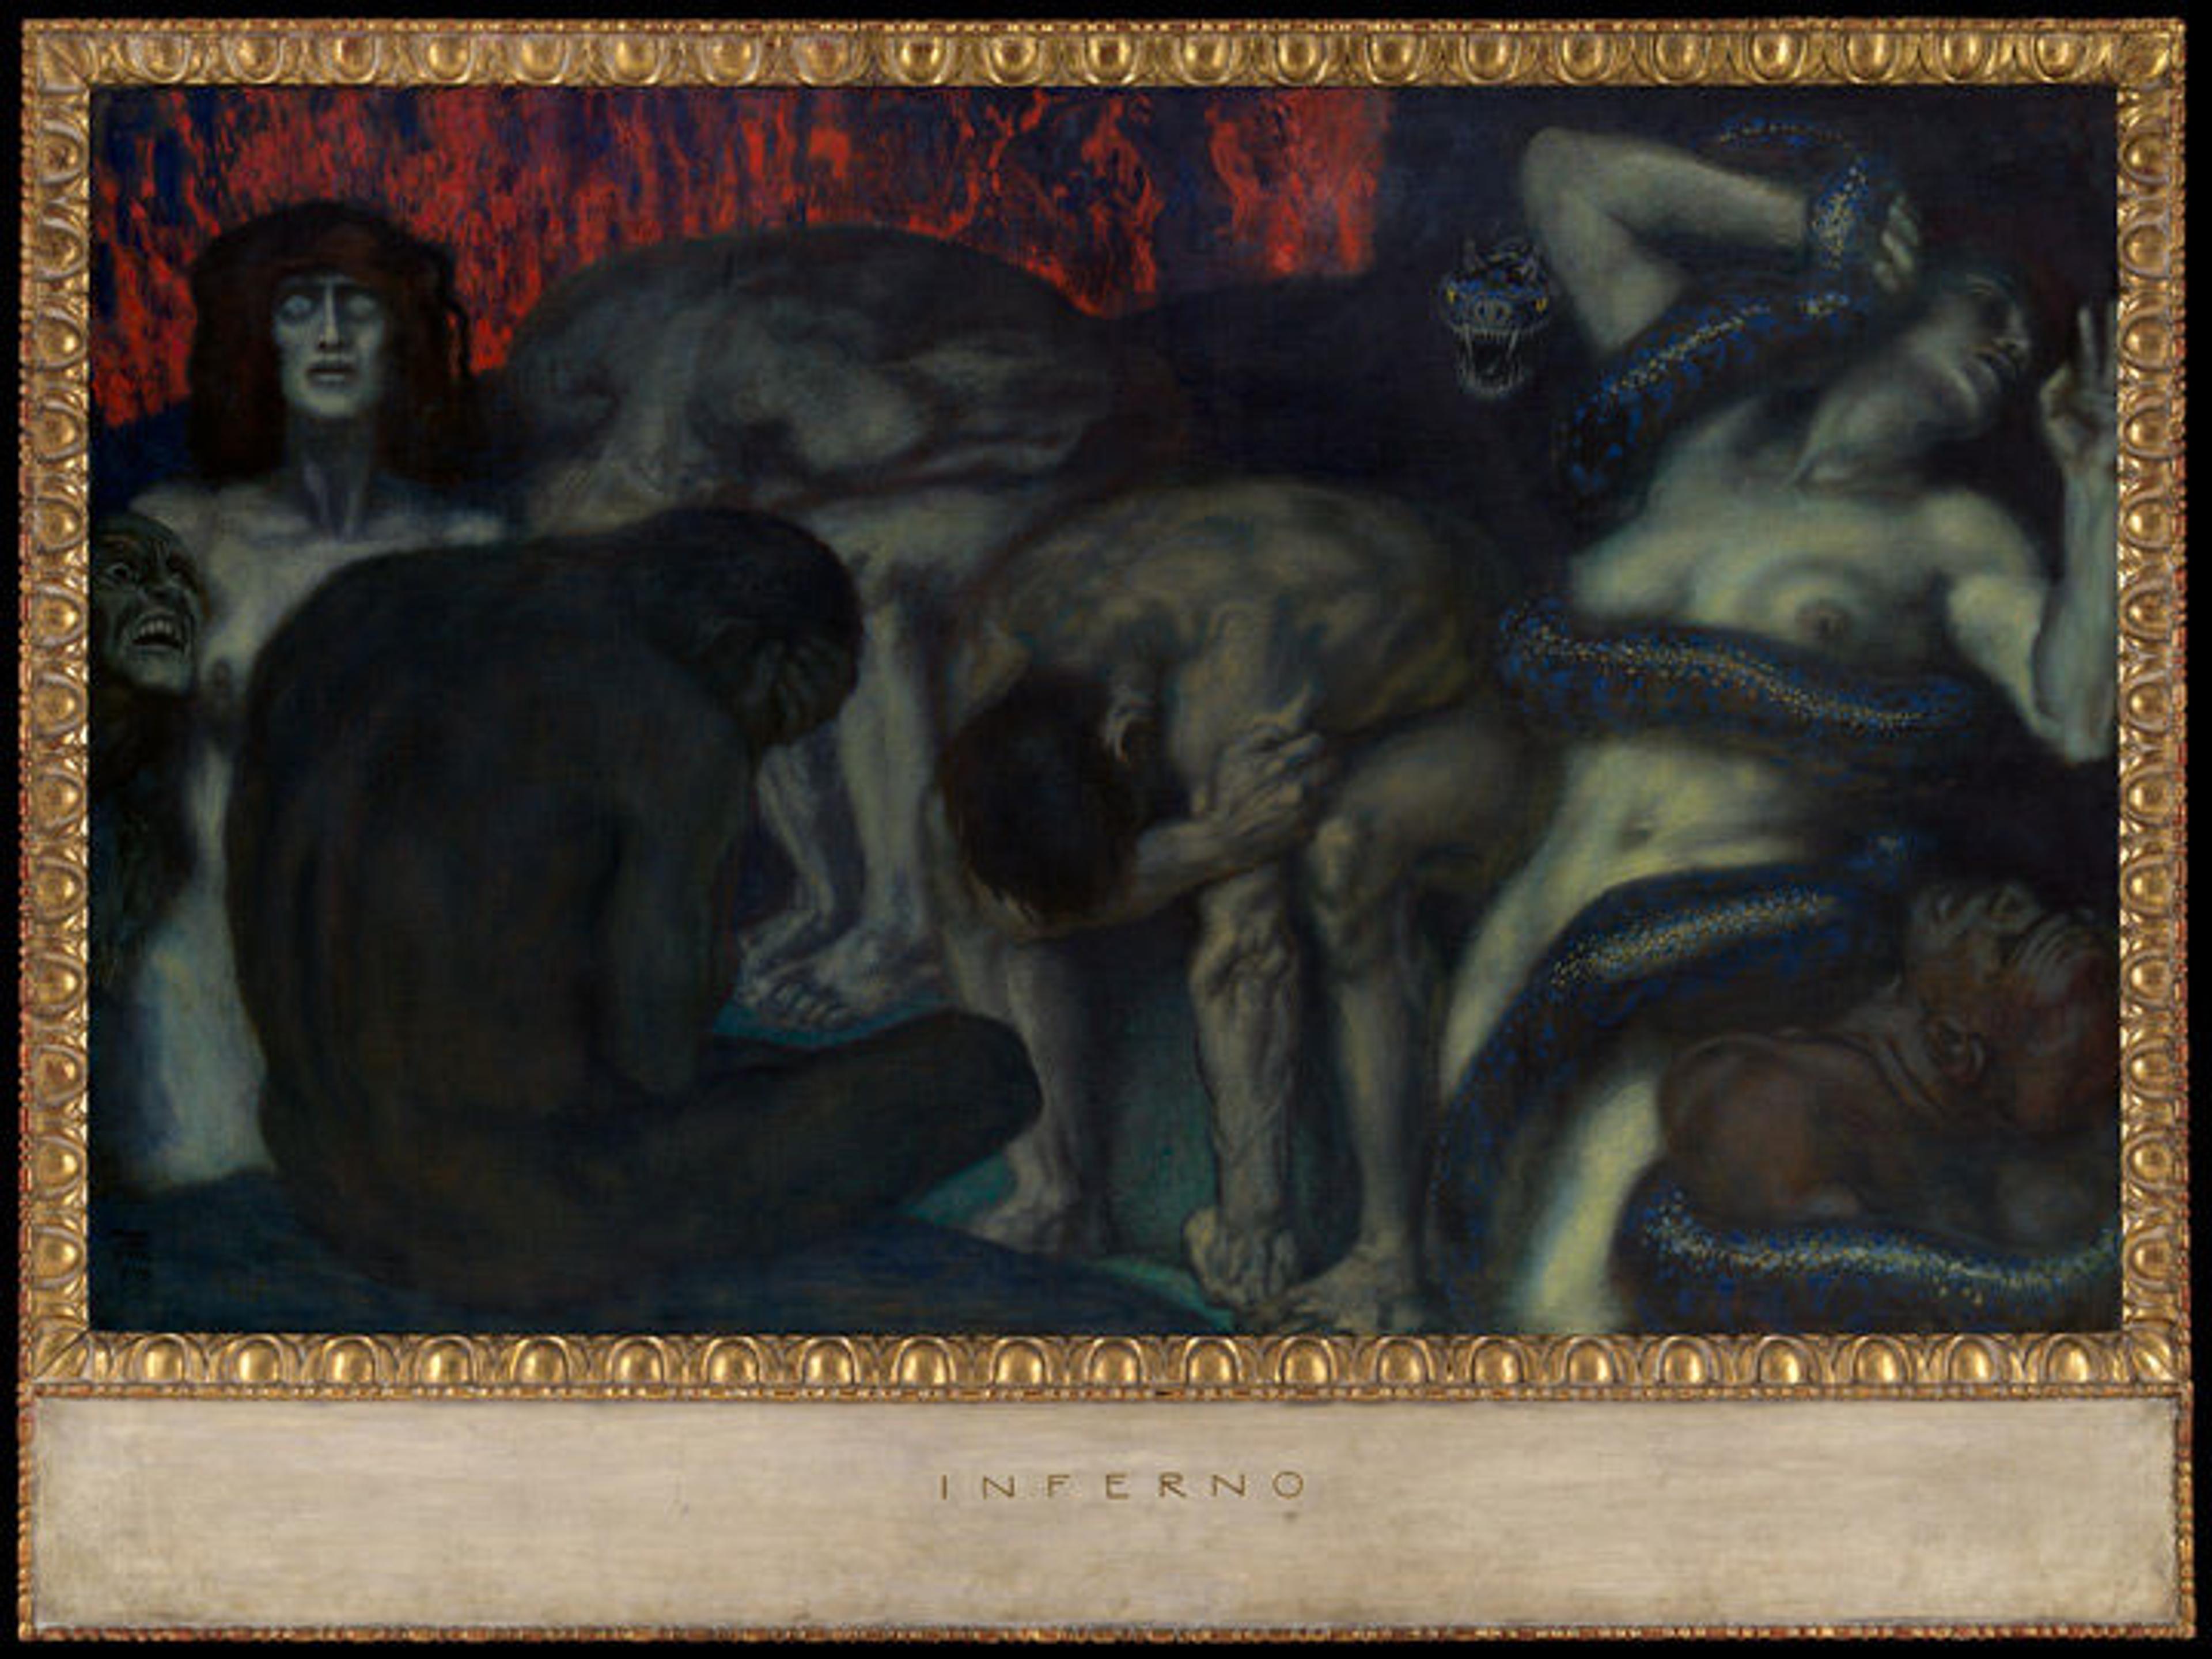 'Inferno' by Franz von Stuck, an expressionistic painting depicting six figures trapped in hell and taunted by a demon at left and a serpent at right